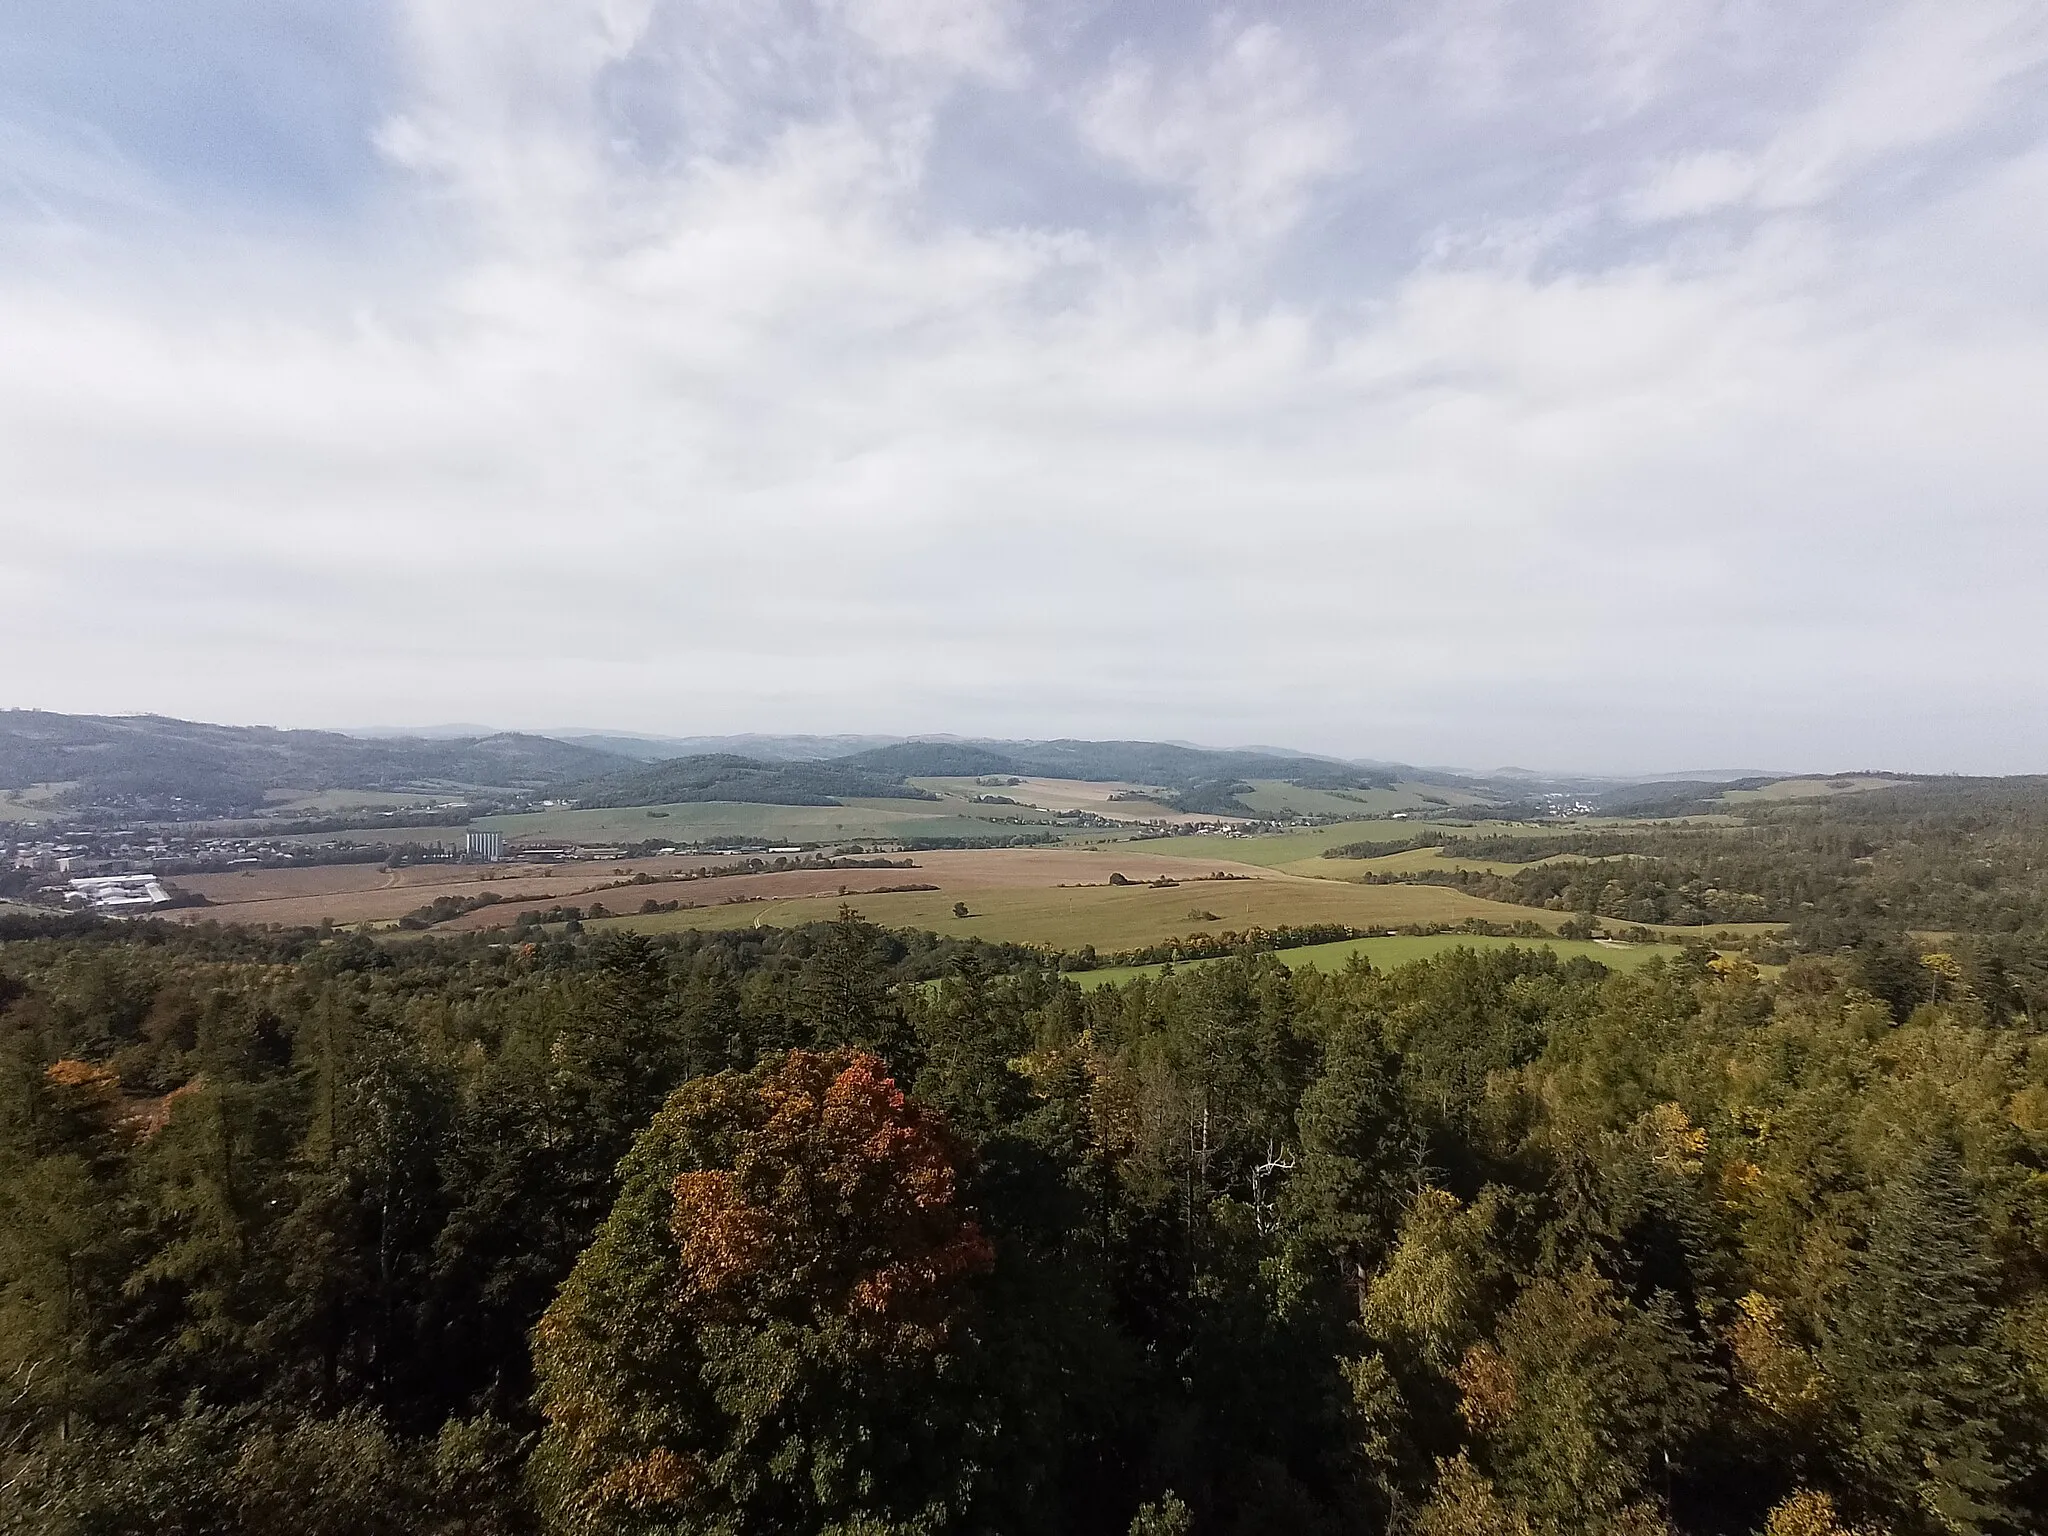 Photo showing: View from the Hraniční vrch lookout tower near the town of Město Albrechtice